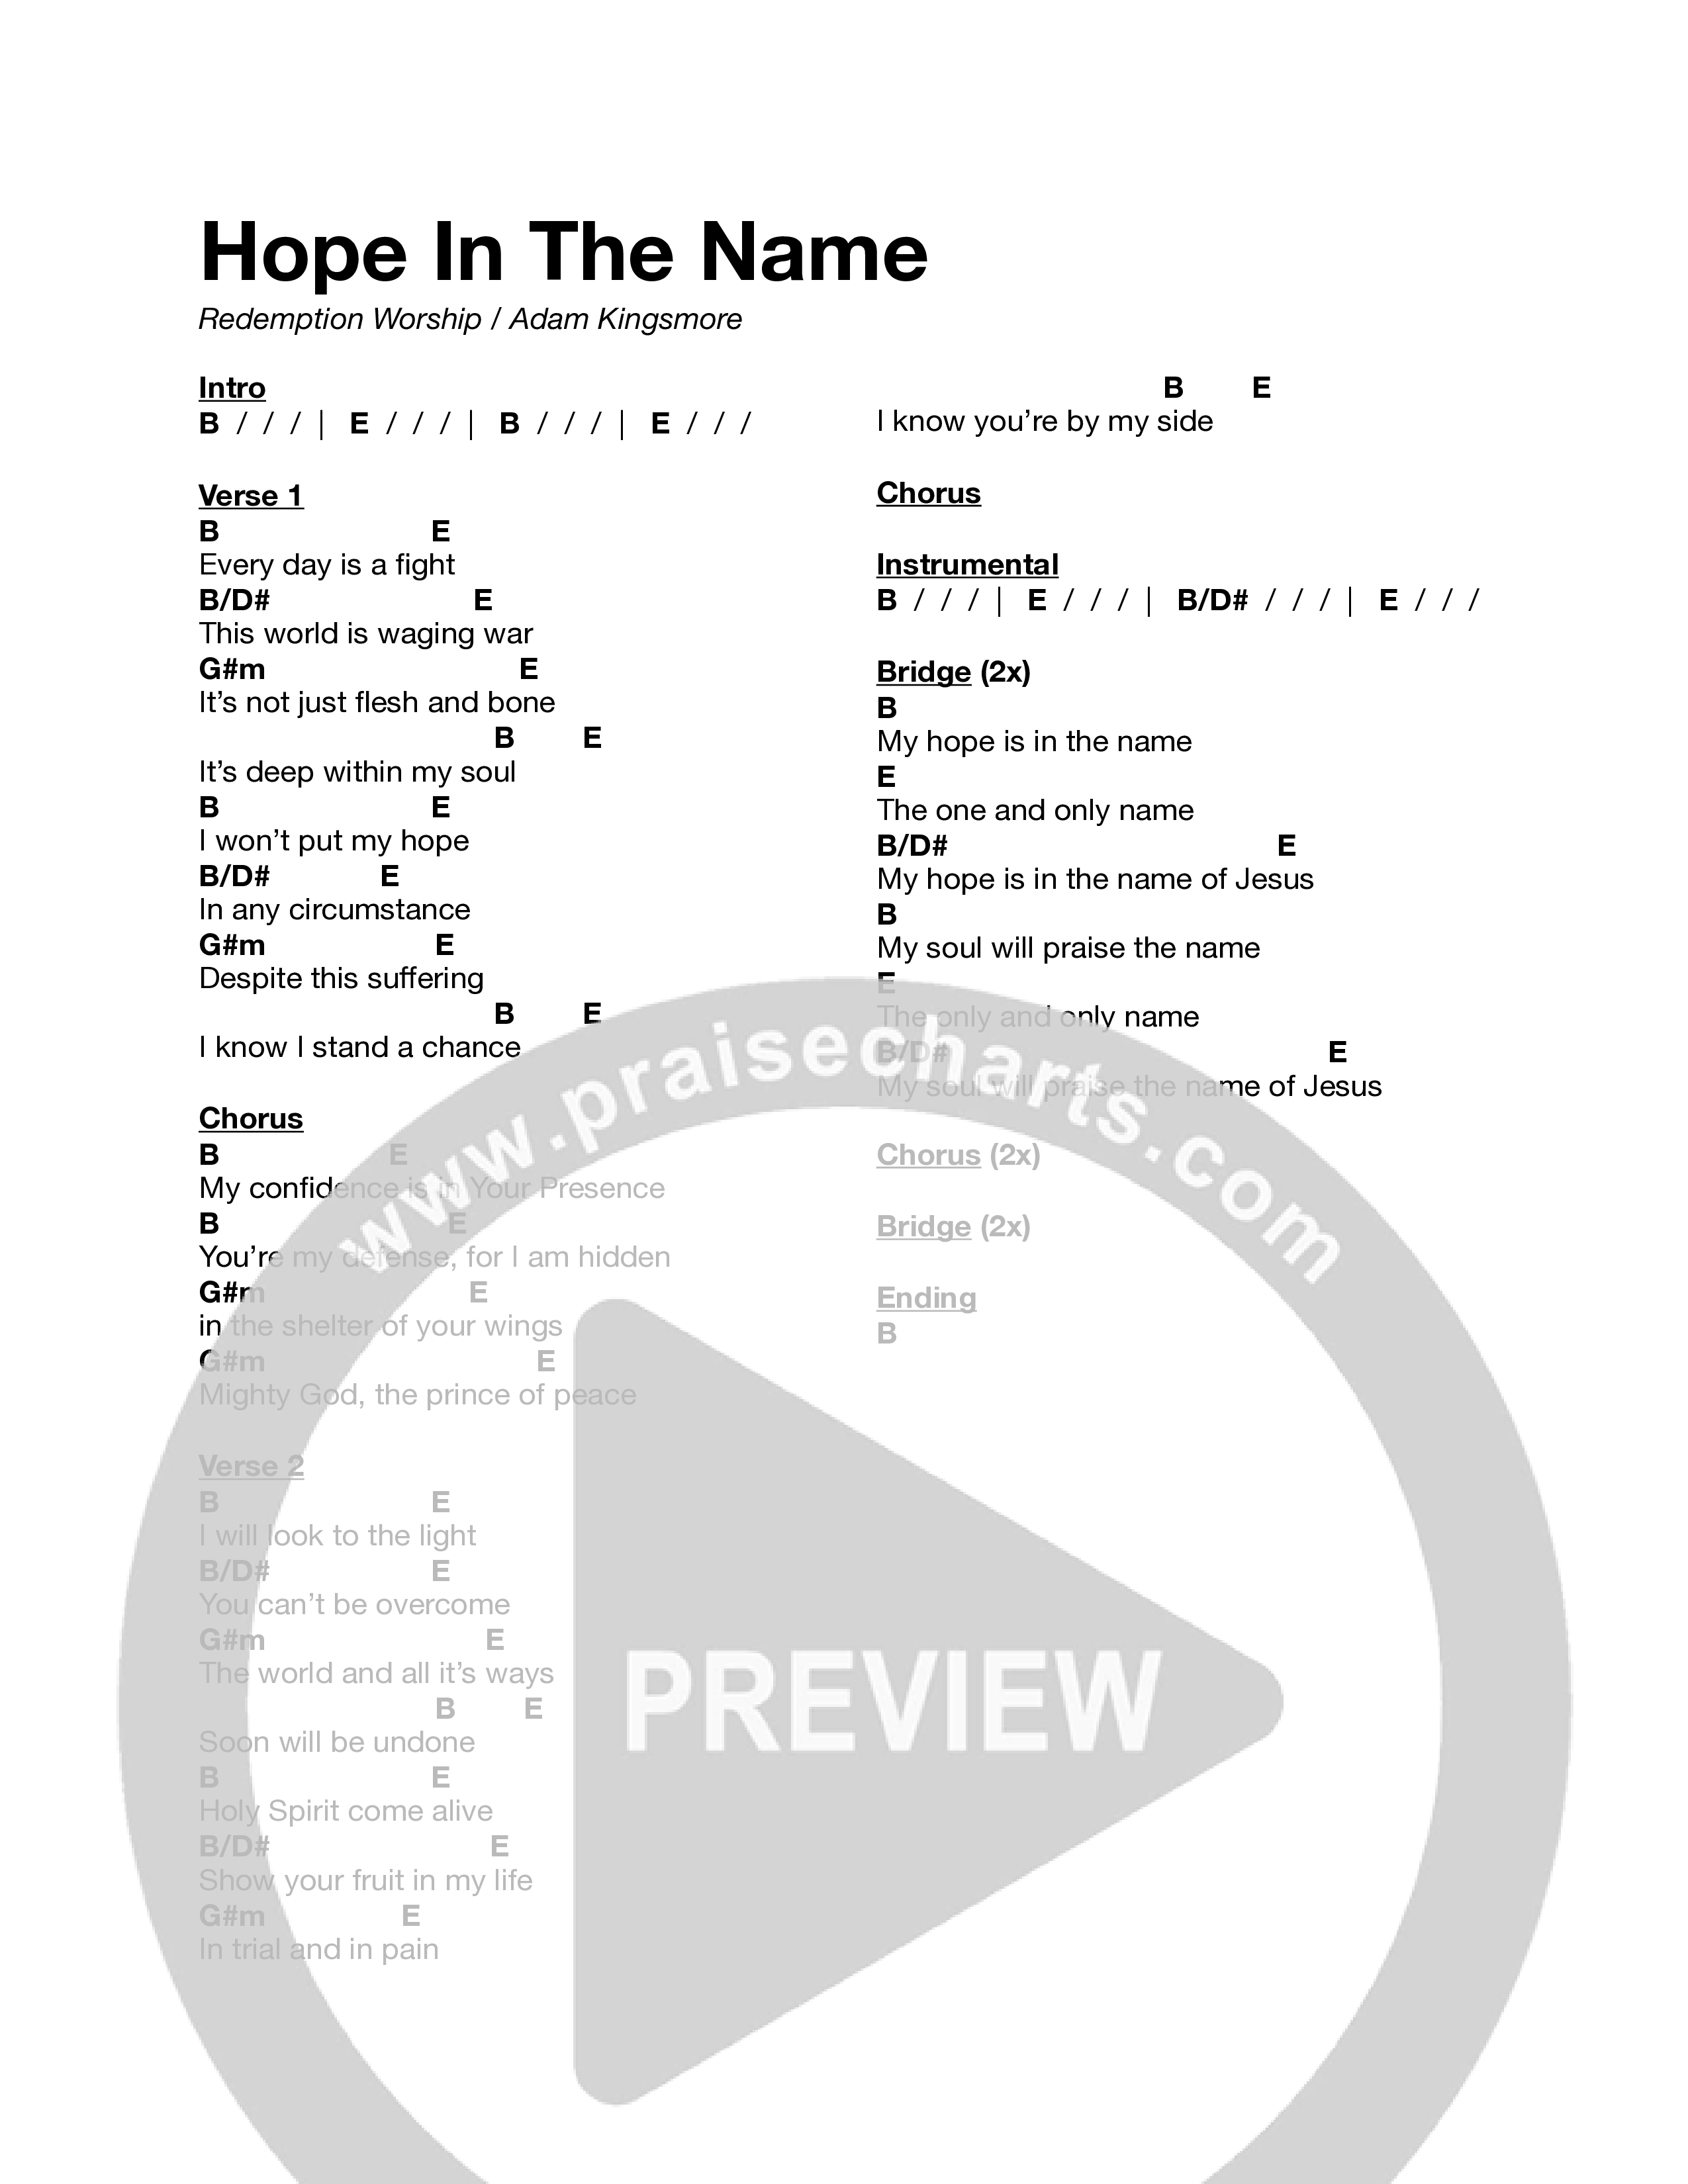 Hope In The Name Chord Chart (Redemption Worship)